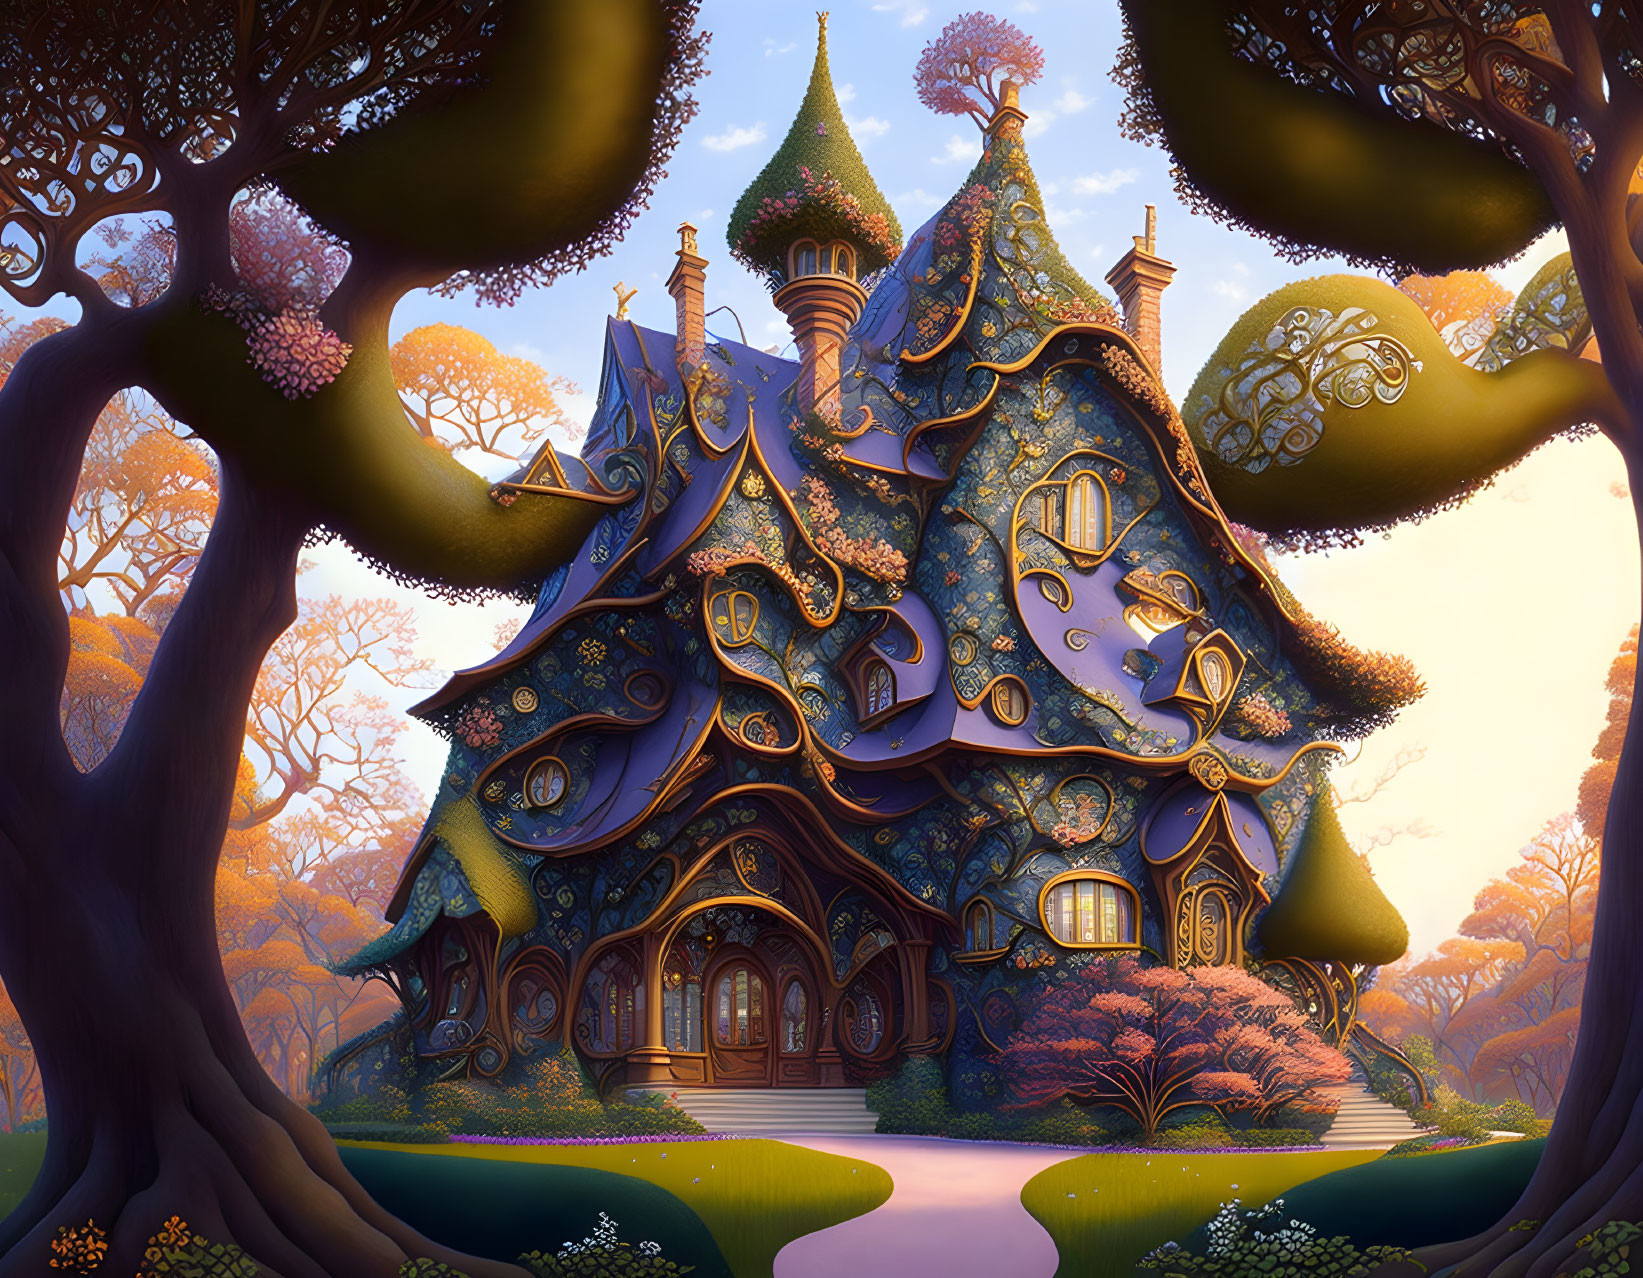 Whimsical fairytale cottage in magical forest twilight